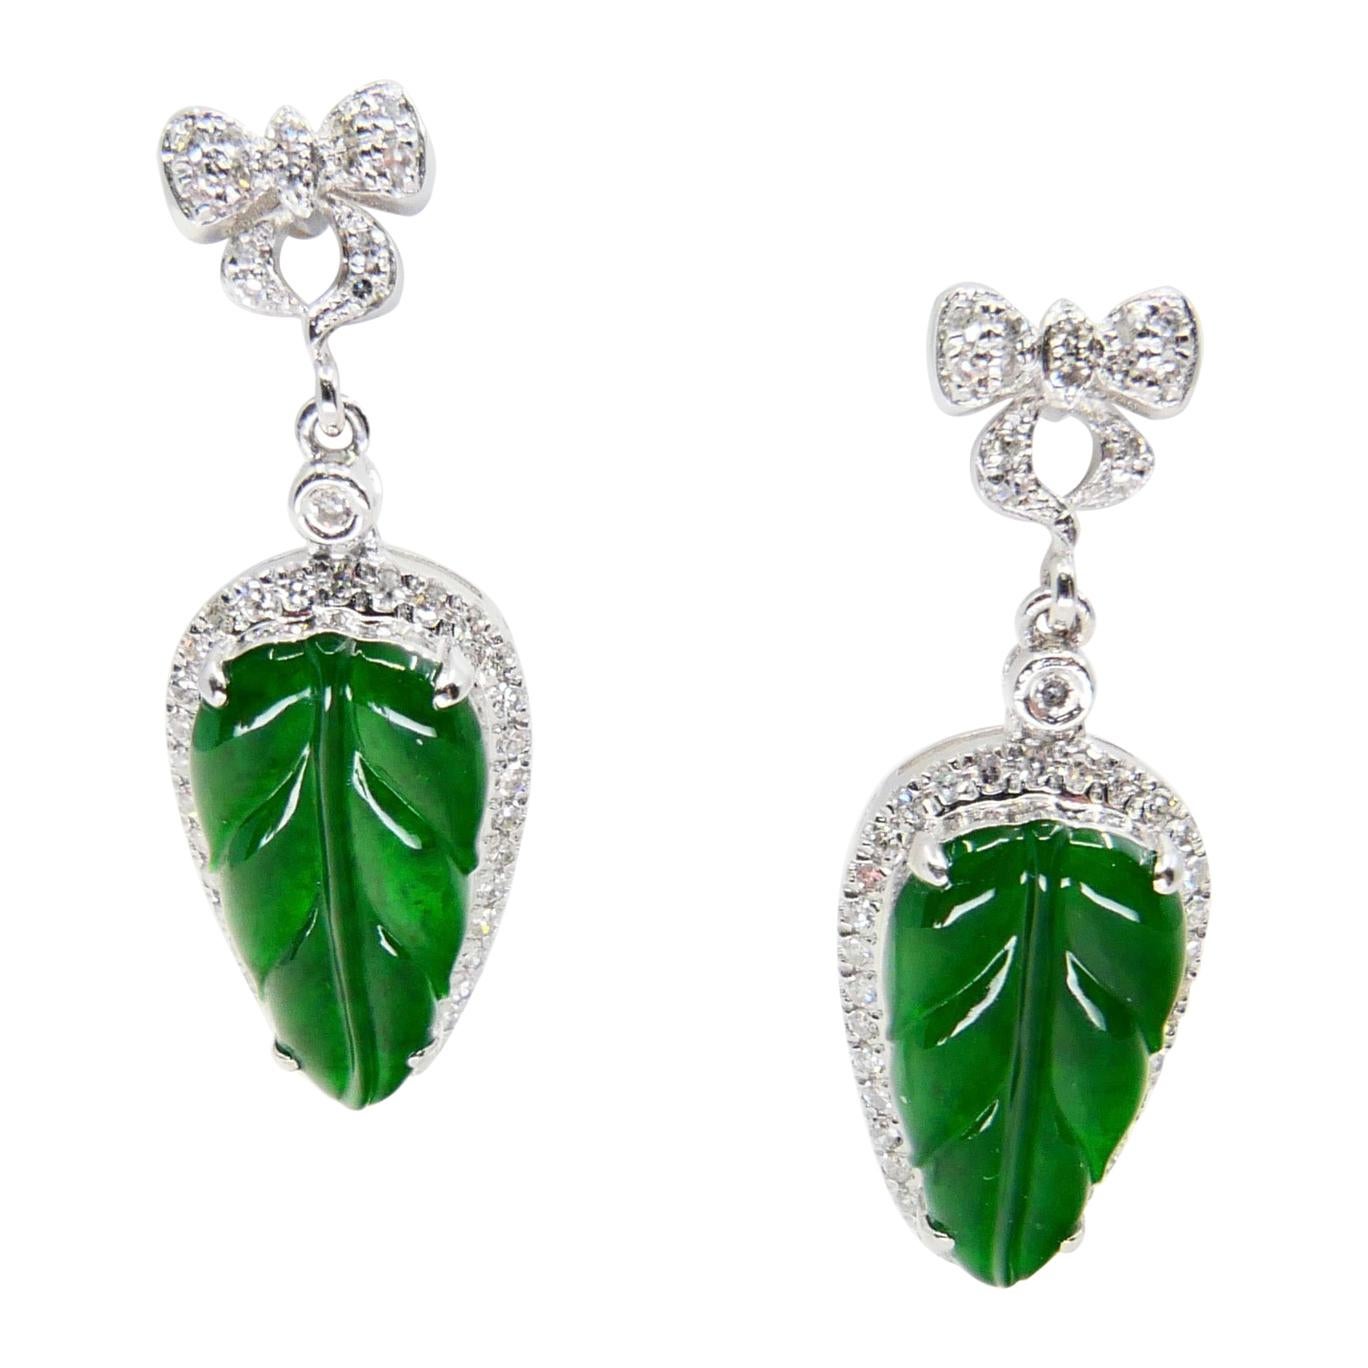 Certified Icy Imperial Green Jade & Diamond Earrings, Collector's Quality For Sale